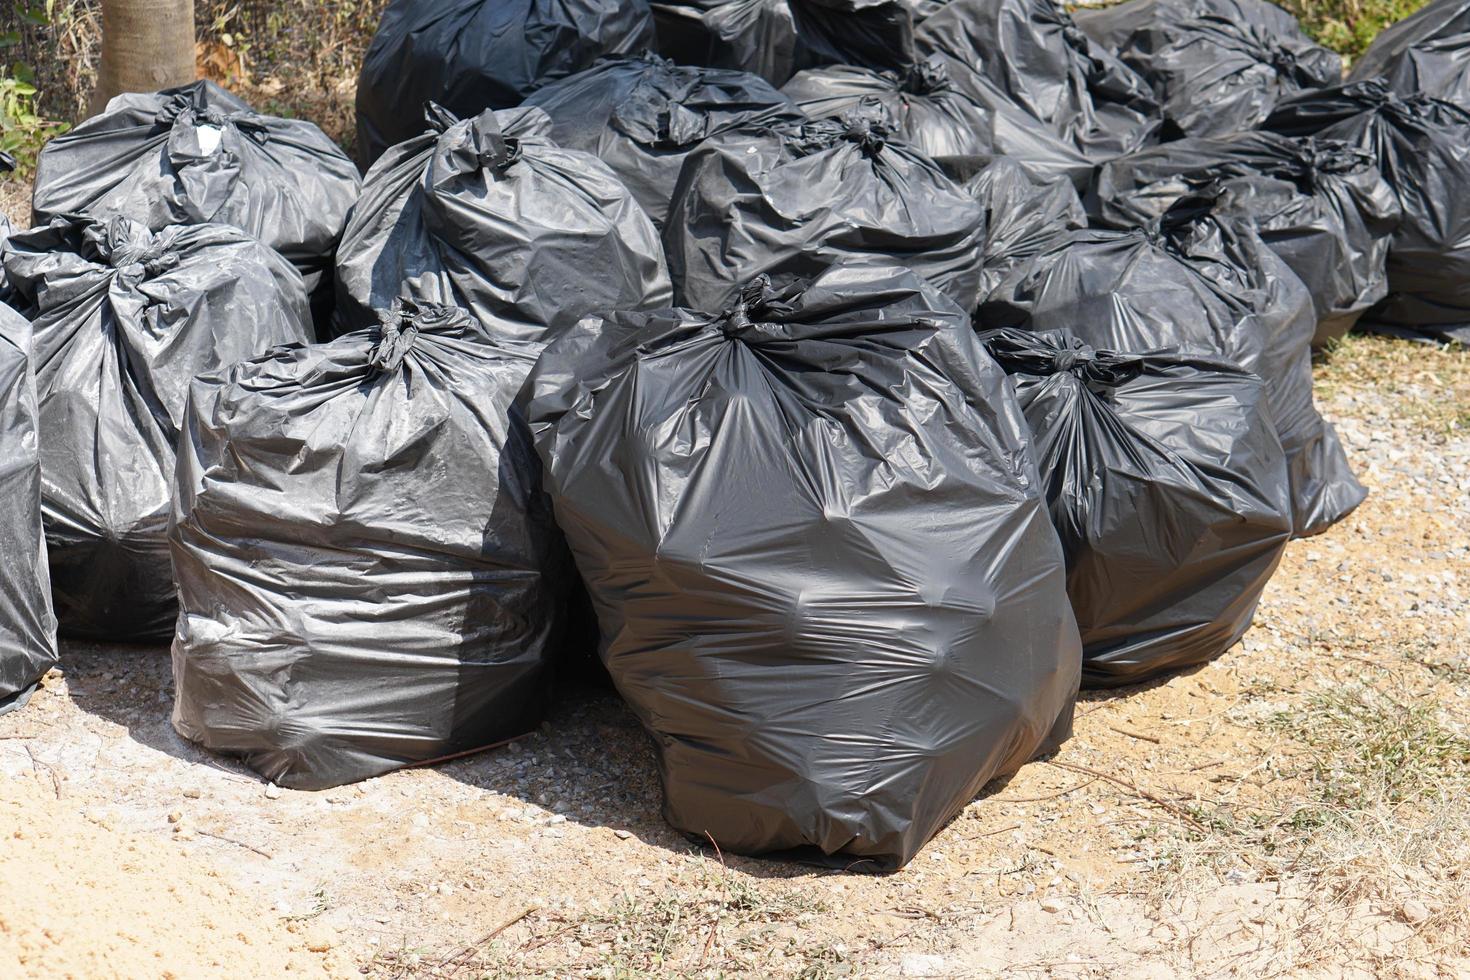 A large black garbage bag on the side of the road. photo